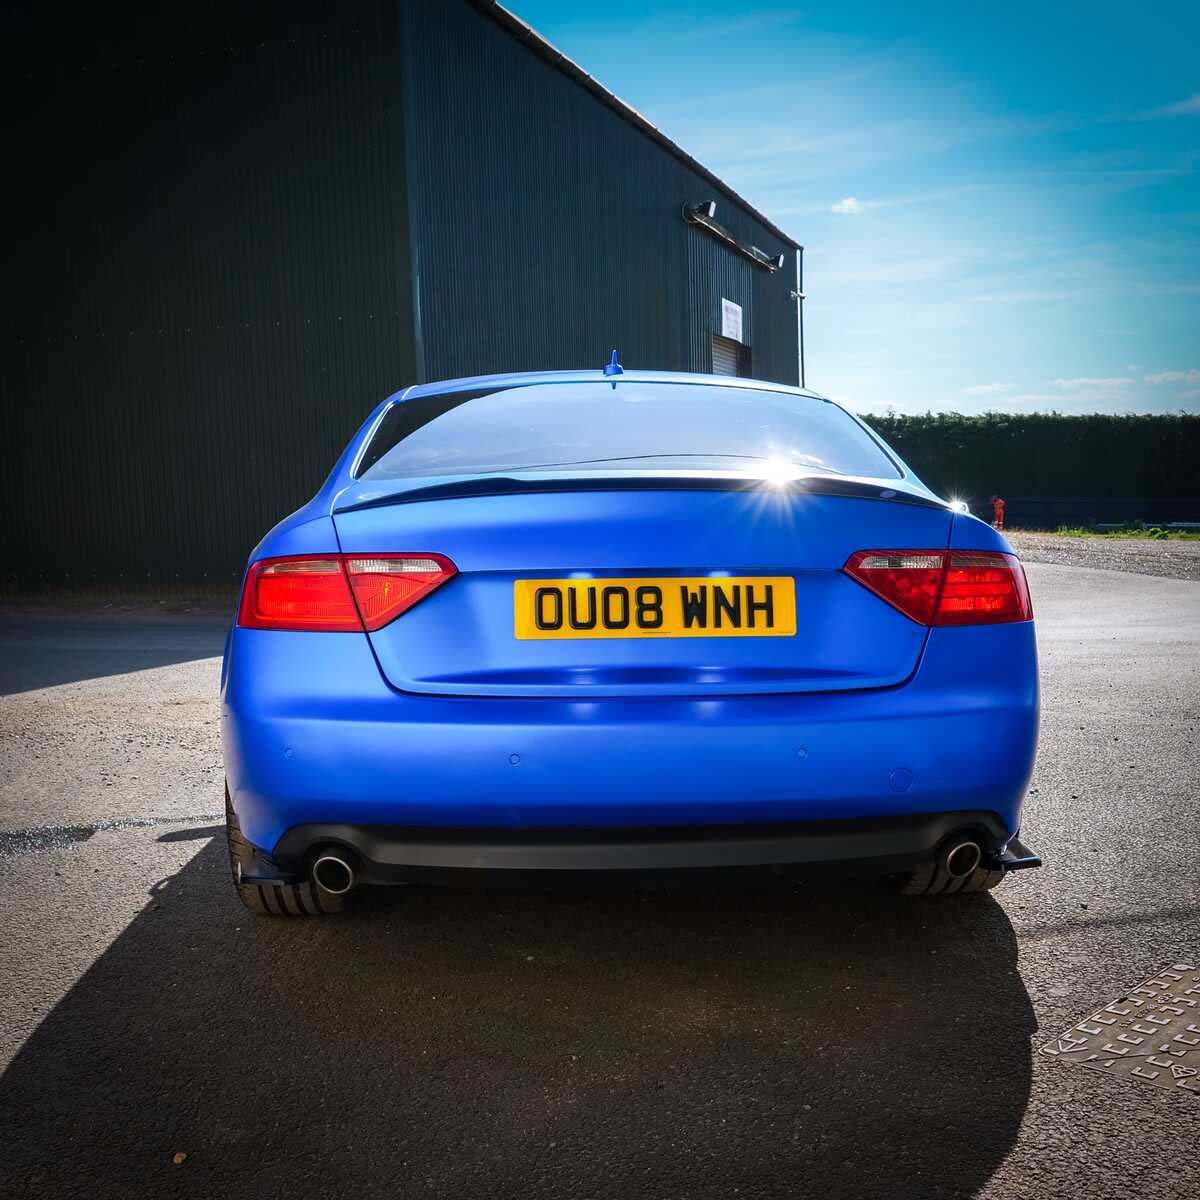 The rear of an audi a5